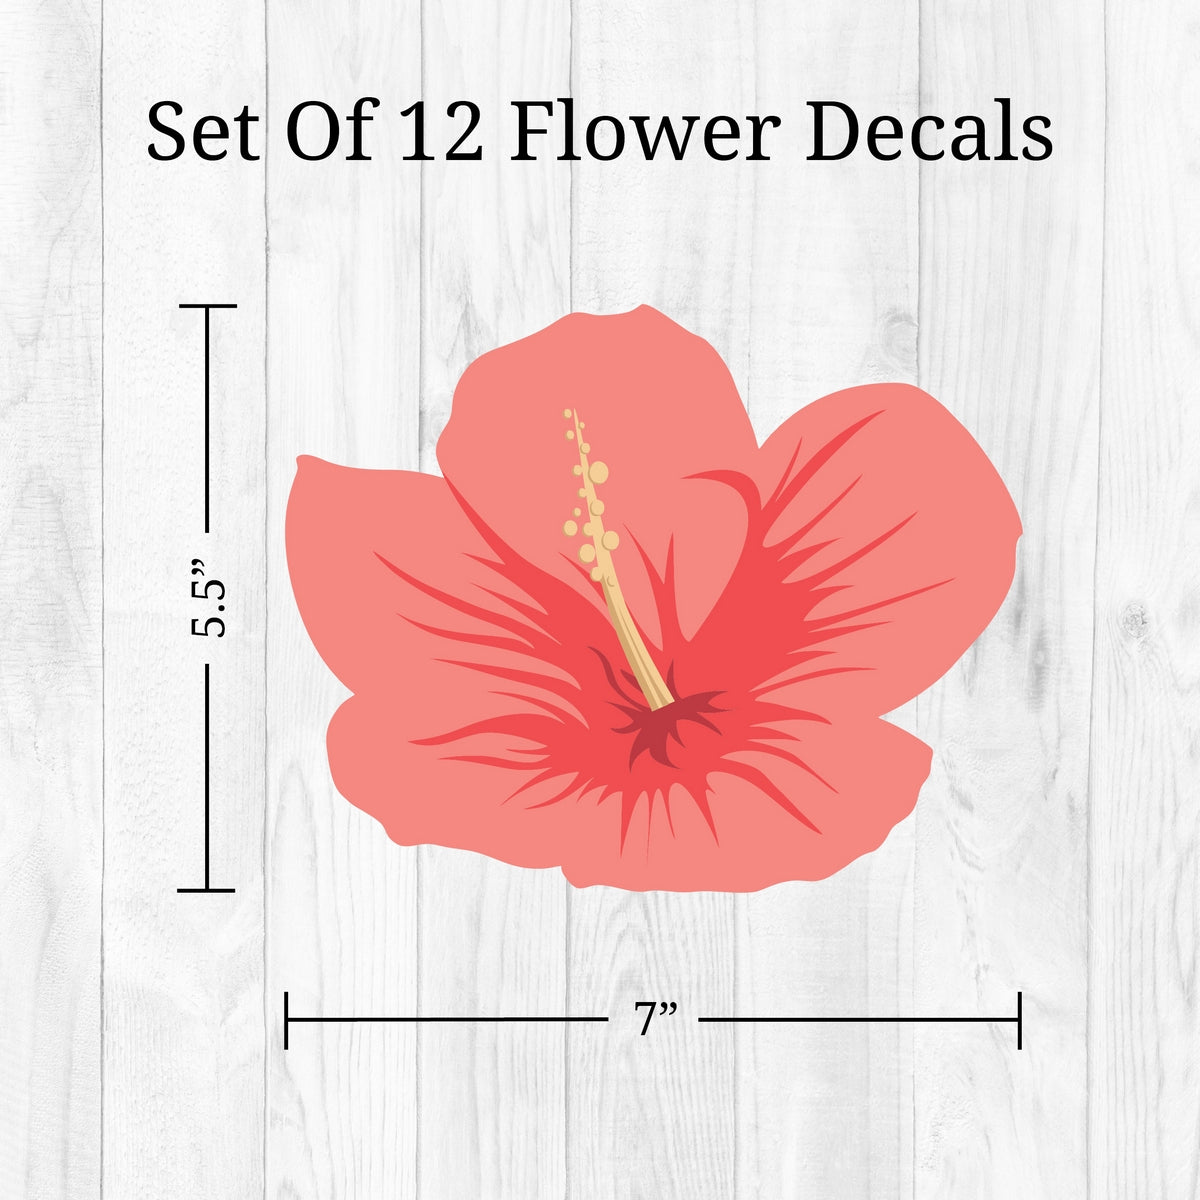 Hibiscus Flowers Wall Decals